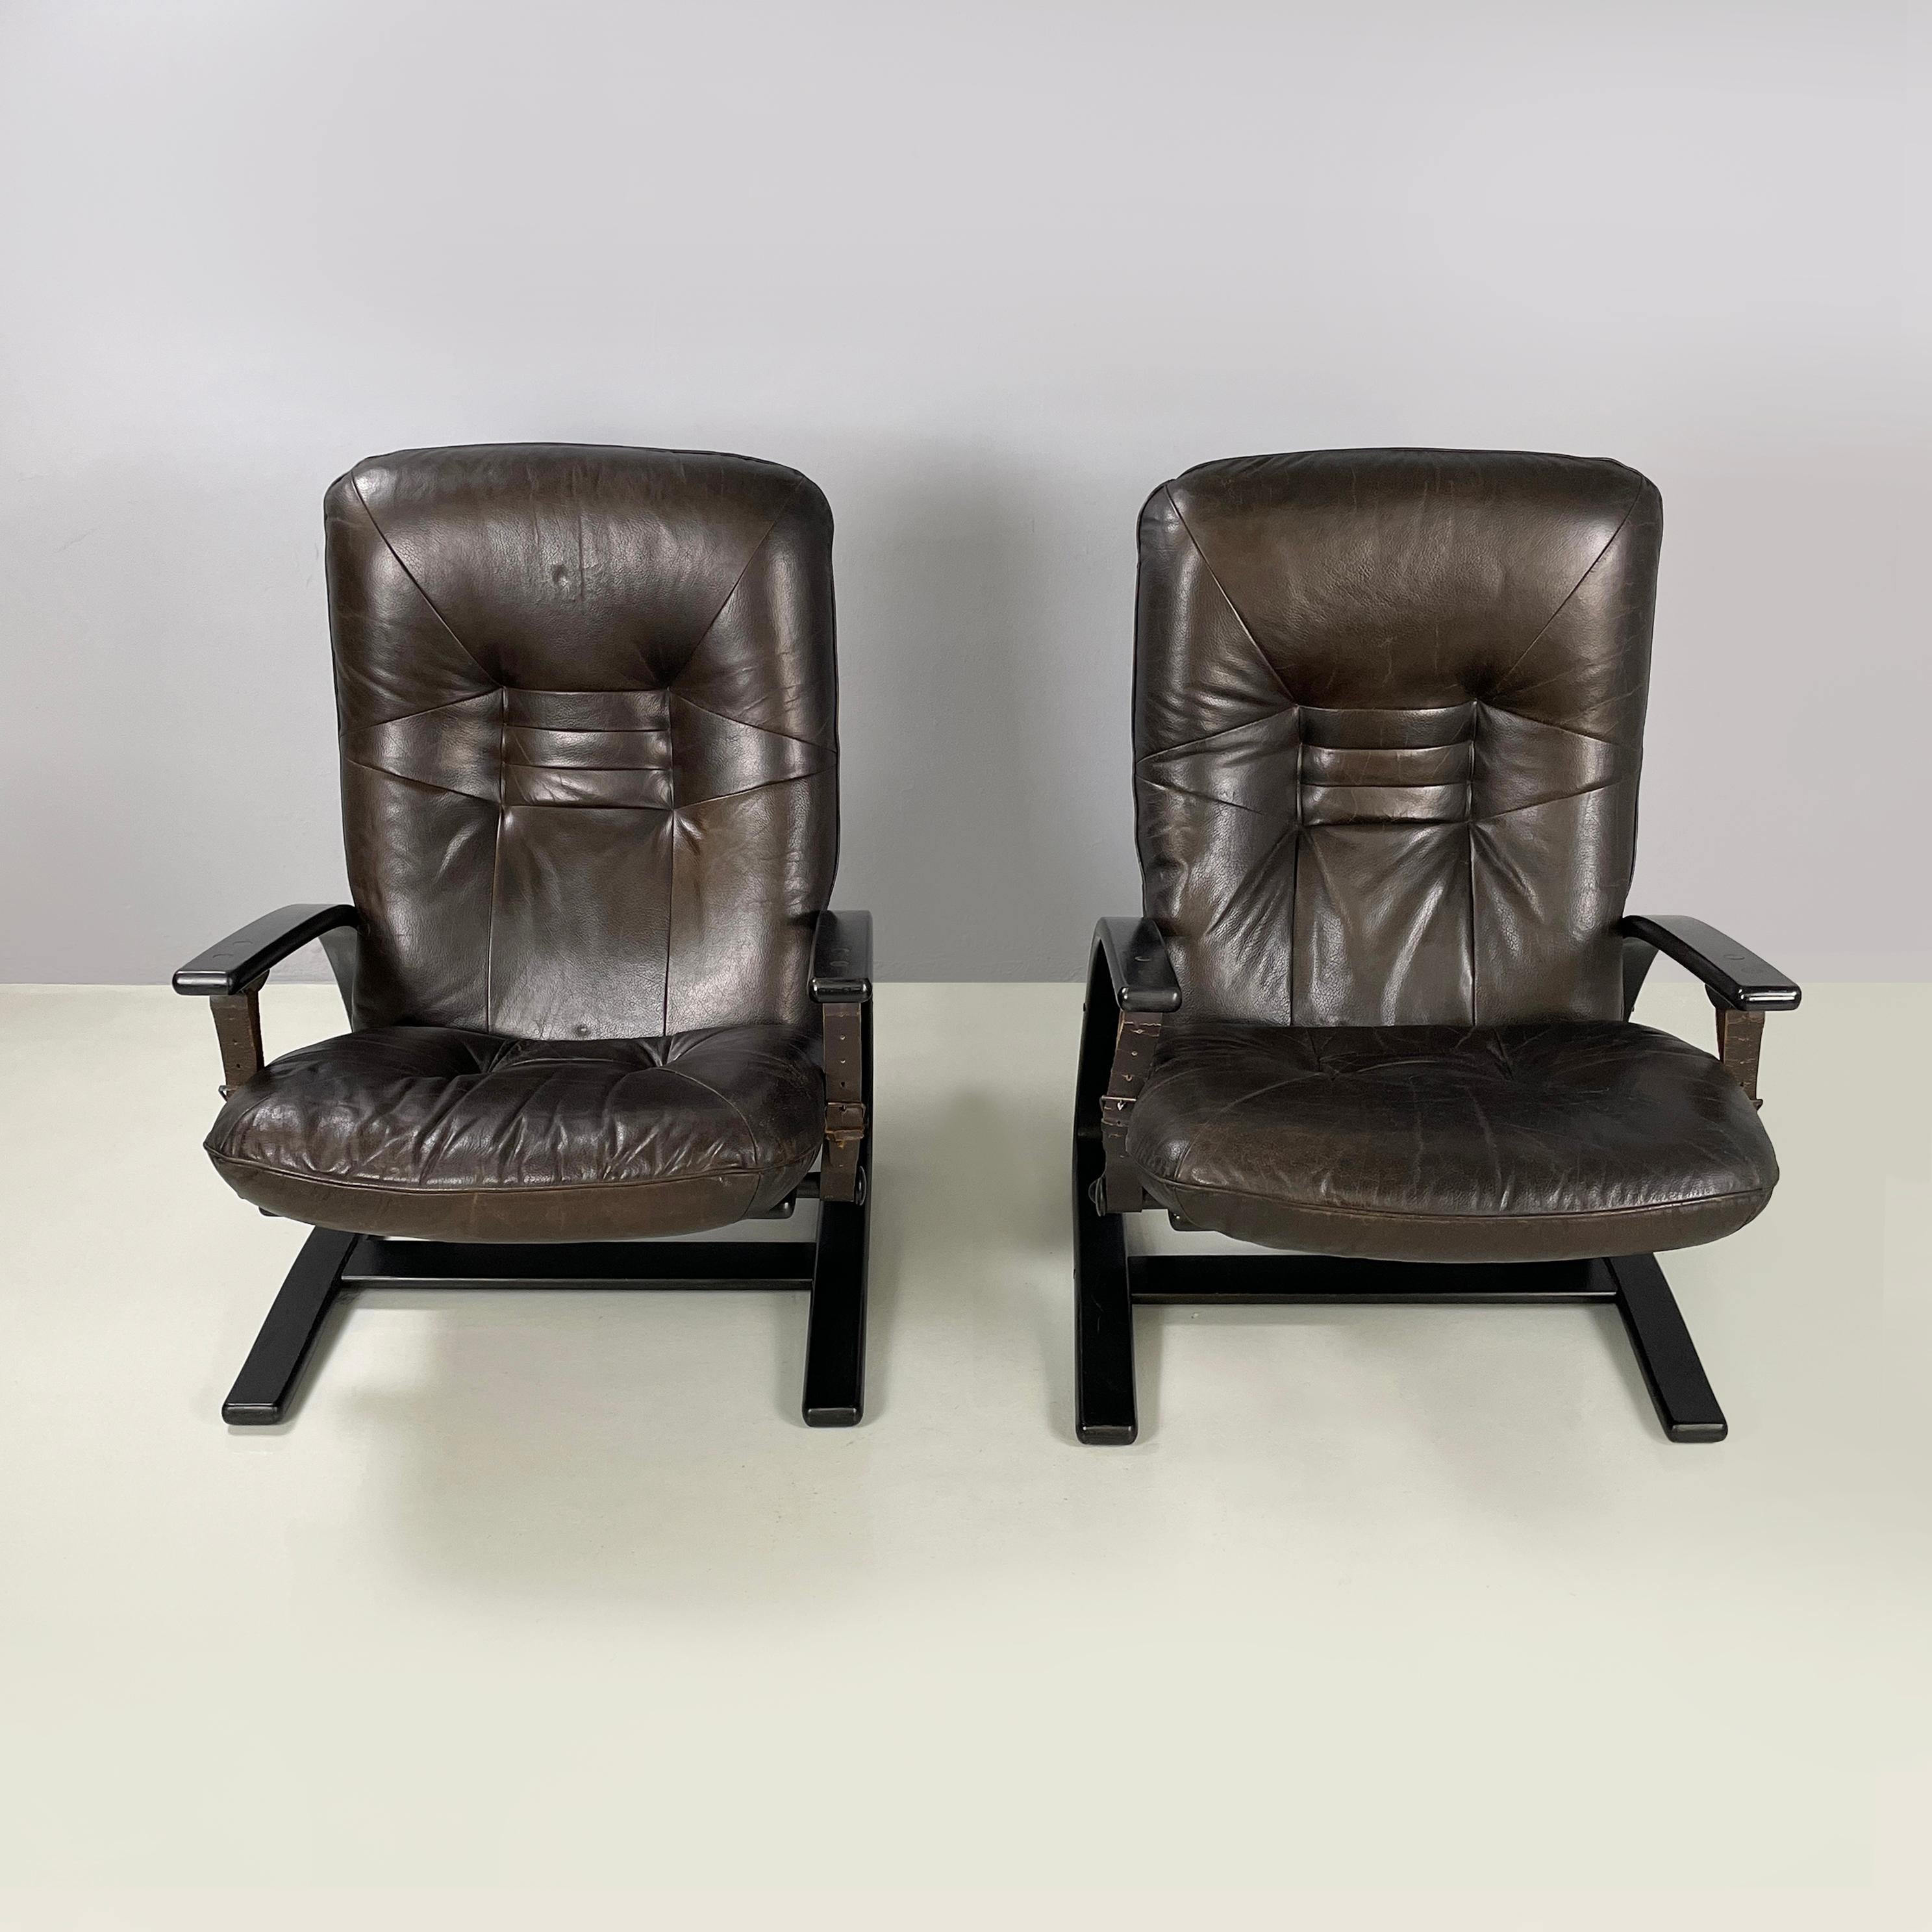 Modern Italian modern Dark brown leather Reclining armchairs and pouf by De Sede, 1970s For Sale